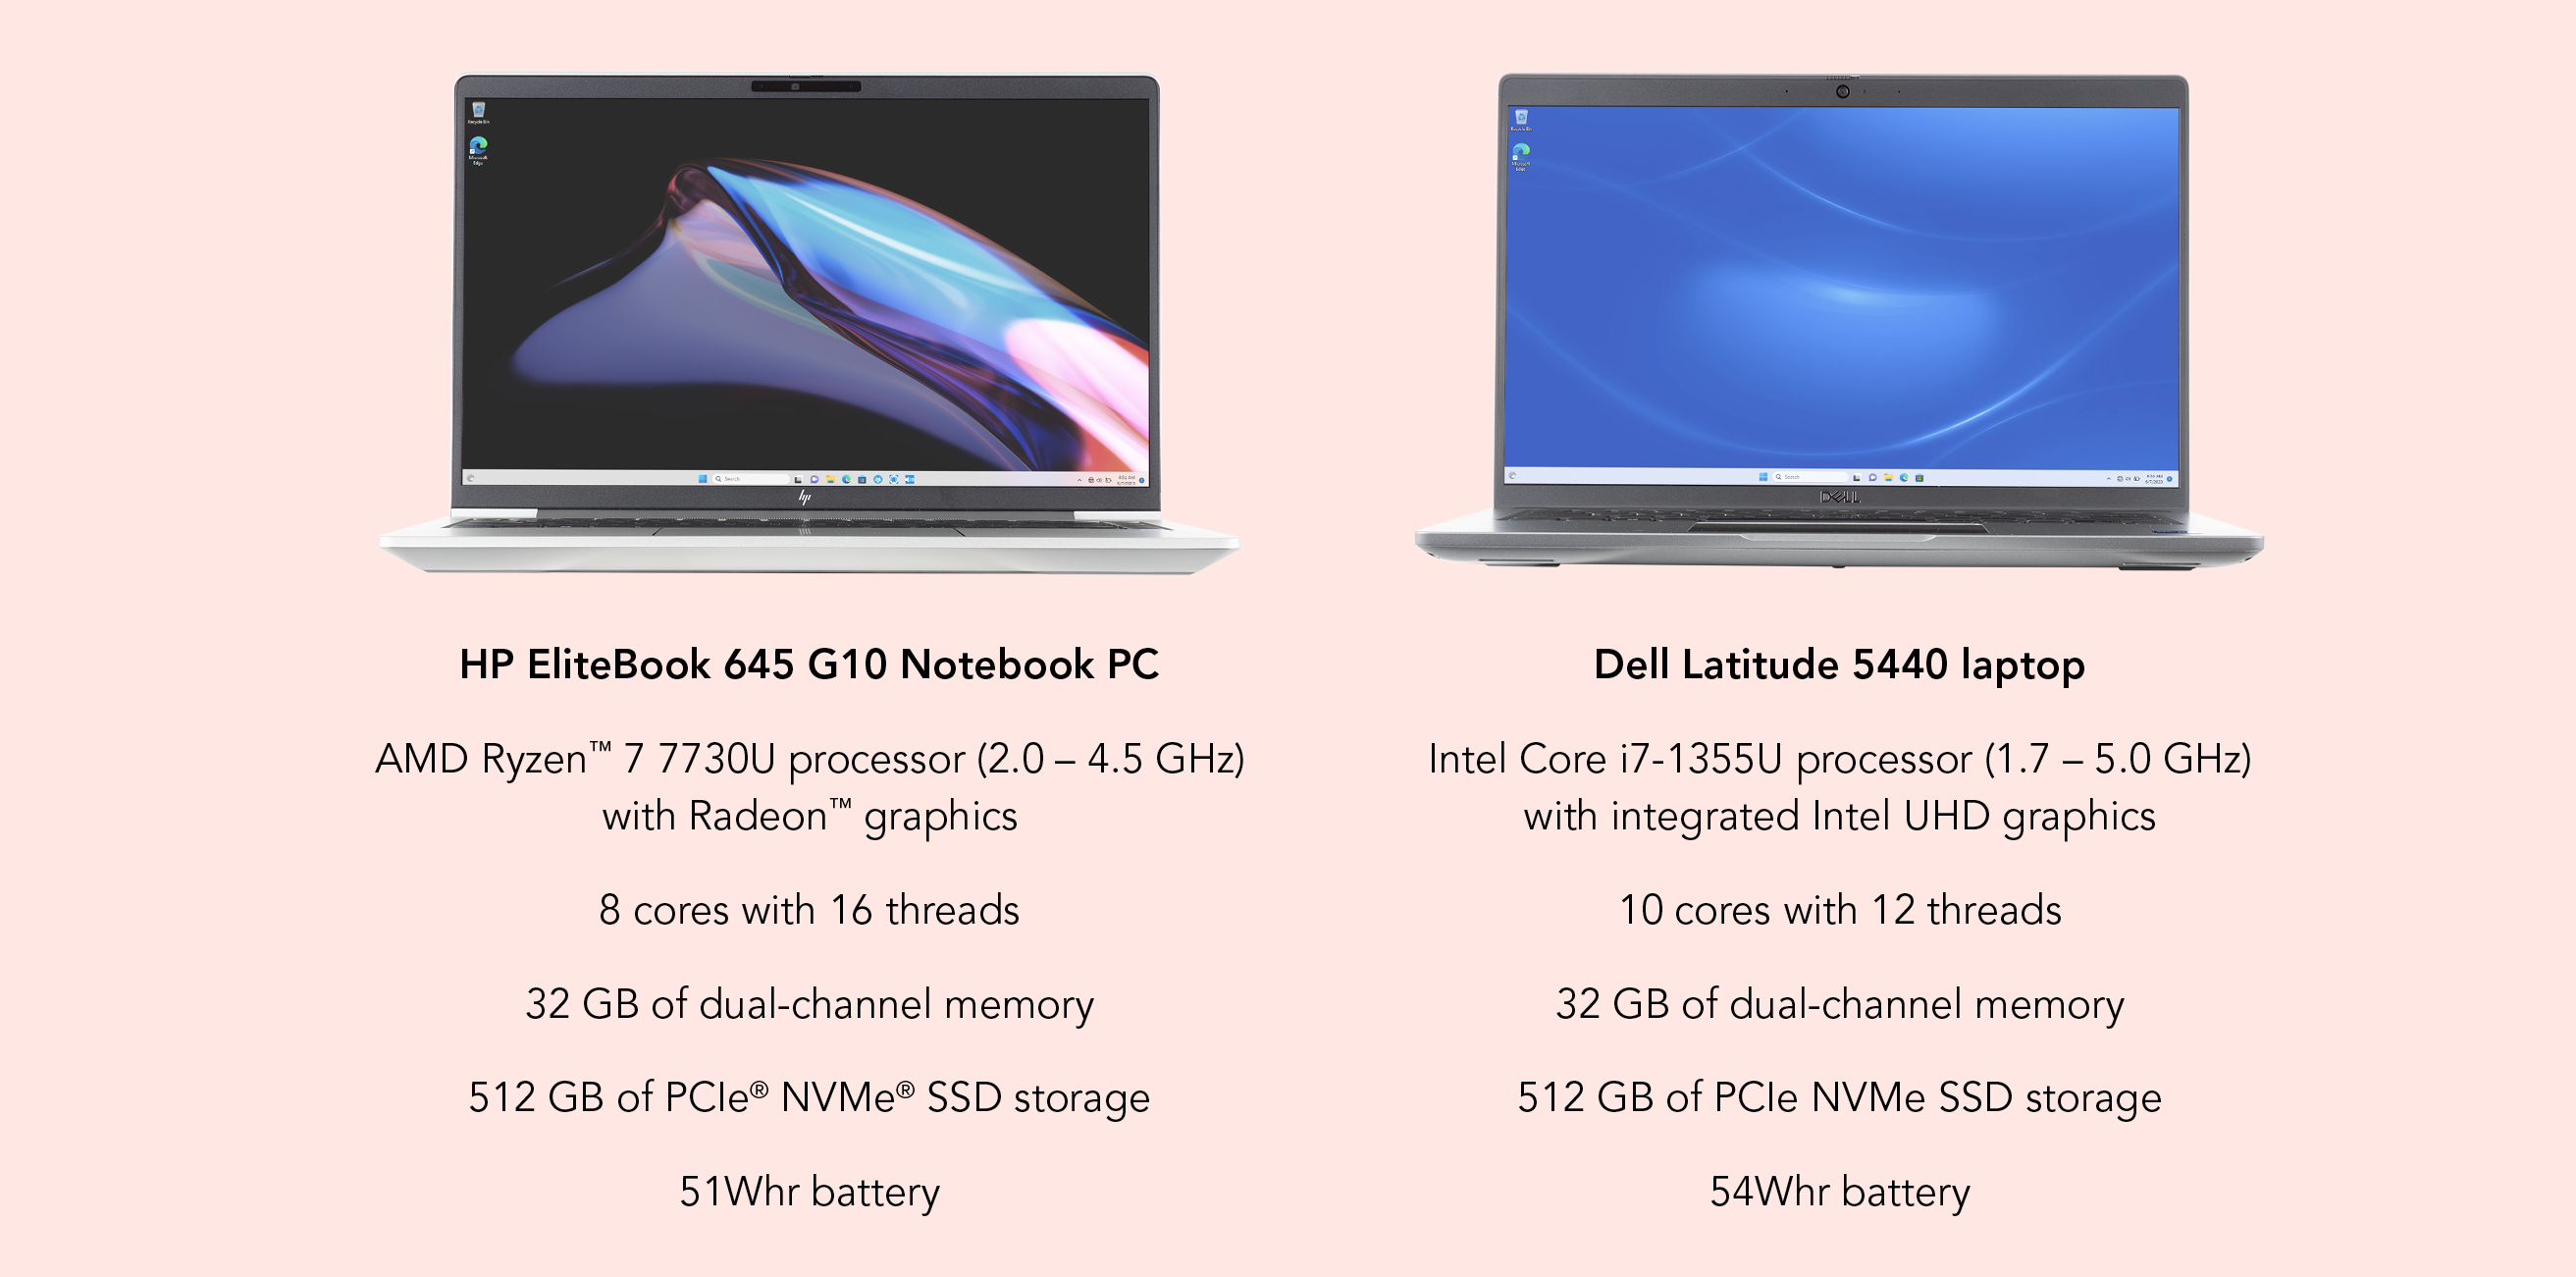 HP EliteBook 645 G10 Notebook PC. AMD Ryzen 7 7730U processor (GHz 2.0 – 4.5) with Radeon graphics. 8 cores with 16 threads. 32 GB of dual-channel memory. 512 GB of PCIe NVMe SSD storage. 51 WHr battery. Dell Latitude 5440 laptop. Intel Core i7-1355U processor (GHz 1.7 – 5.0) with integrated Intel UHD graphics. 10 cores with 12 threads. 32 GB of dual-channel memory. 512 GB of PCIe NVMe SSD storage. 54 WHr battery.